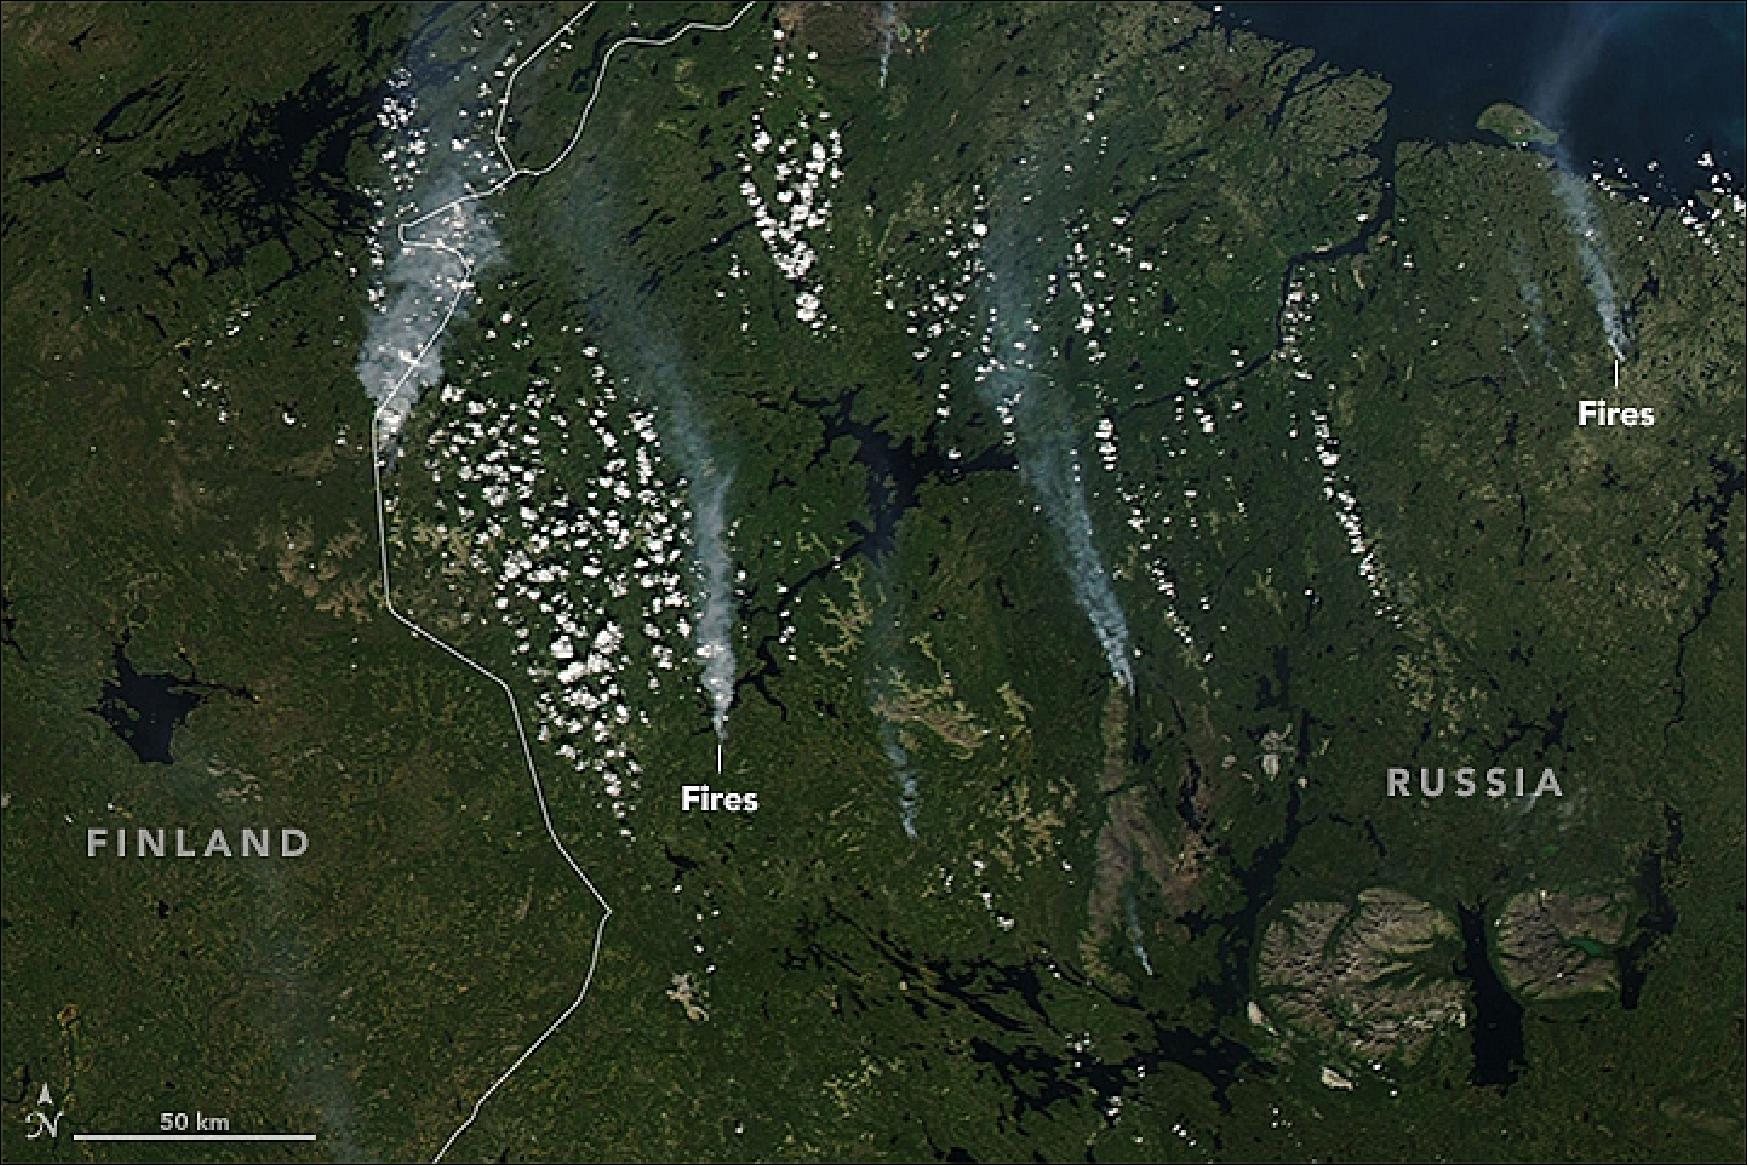 Figure 21: This natural-color image shows fires near the Russia-Finland border. The image was captured by MODIS on NASA’s Aqua satellite on July 20, 2018 (image credit: NASA Earth Observatory image by Lauren Dauphin and Joshua Stevens, using MODIS data from LANCE/EOSDIS Rapid Response and the Level 1 and Atmospheres Active Distribution System (LAADS). Story by Kasha Patel)